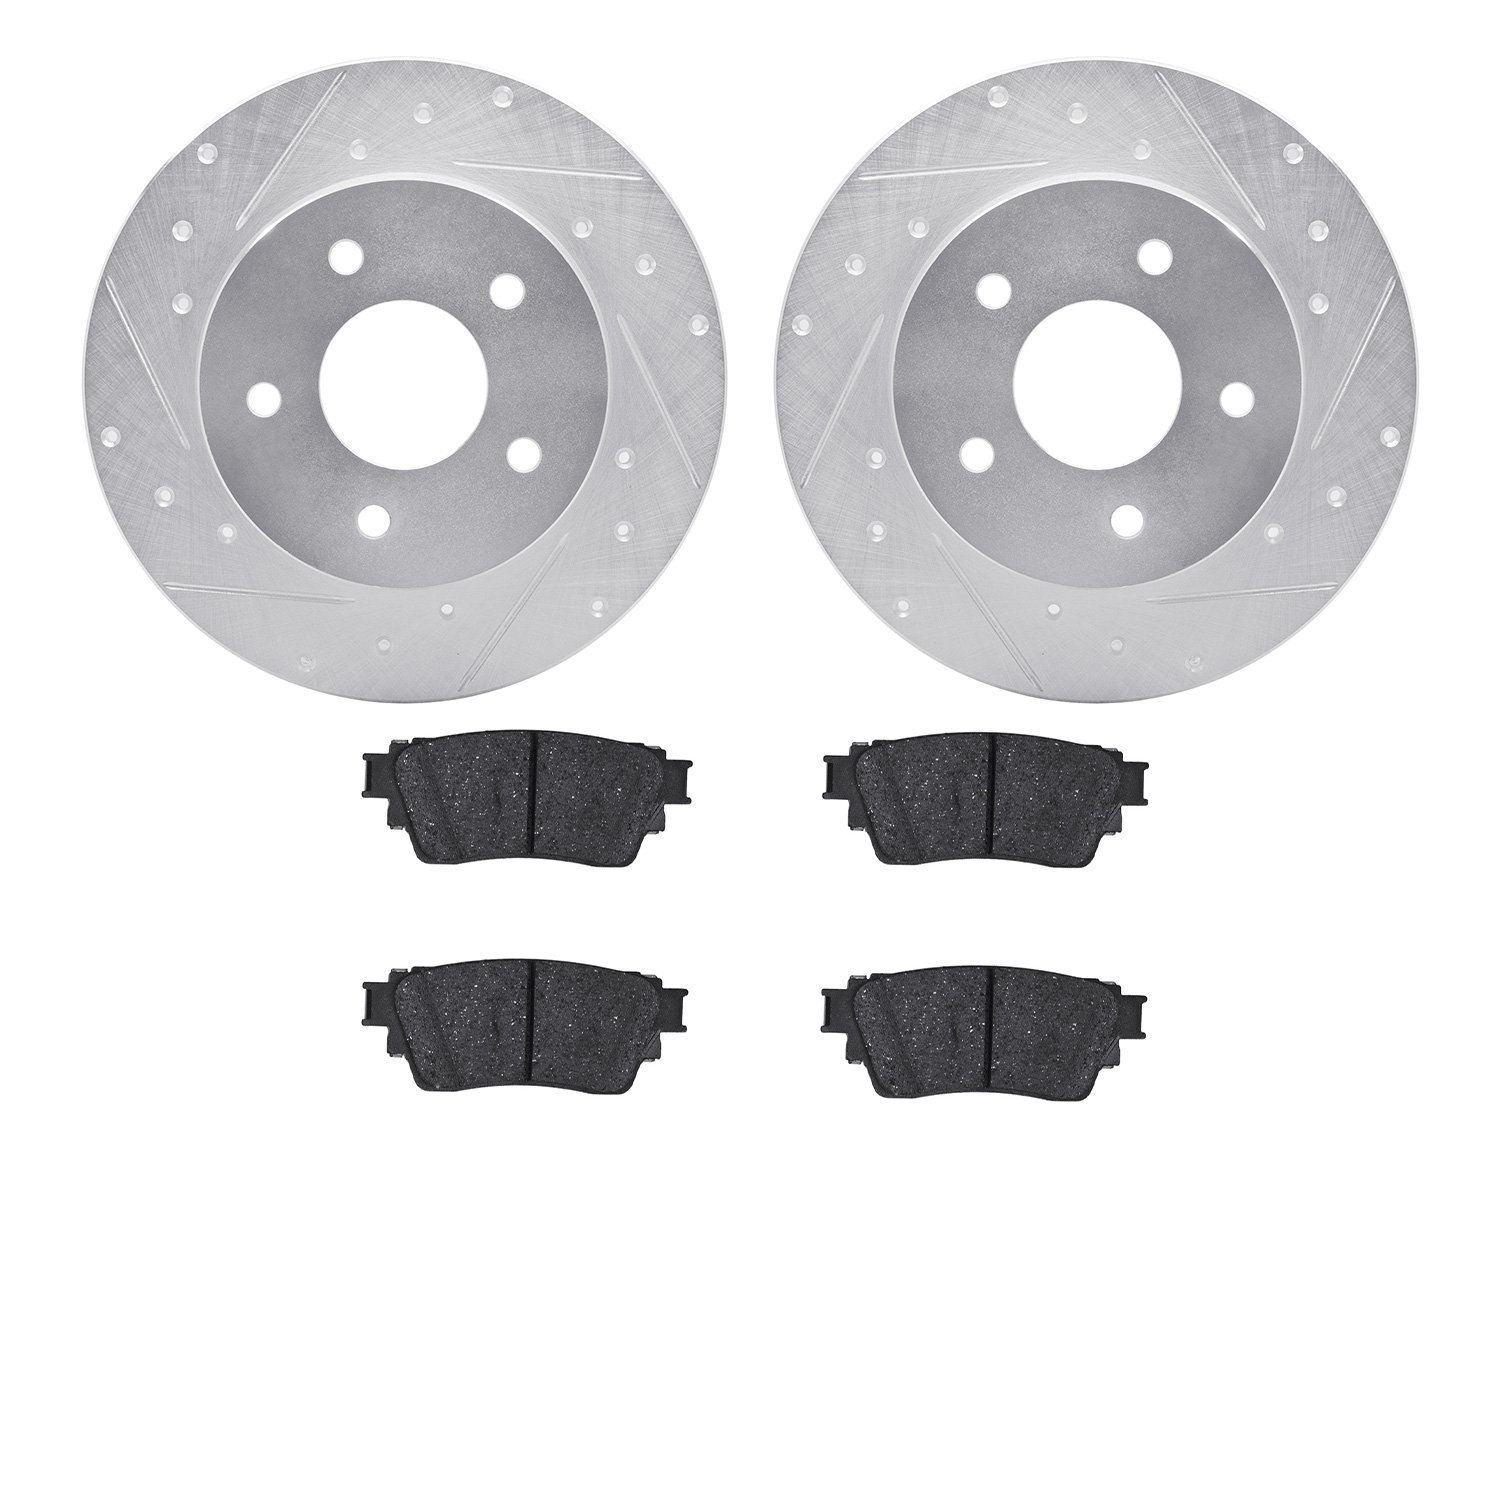 7502-67122 Drilled/Slotted Brake Rotors w/5000 Advanced Brake Pads Kit [Silver], Fits Select Infiniti/Nissan, Position: Rear